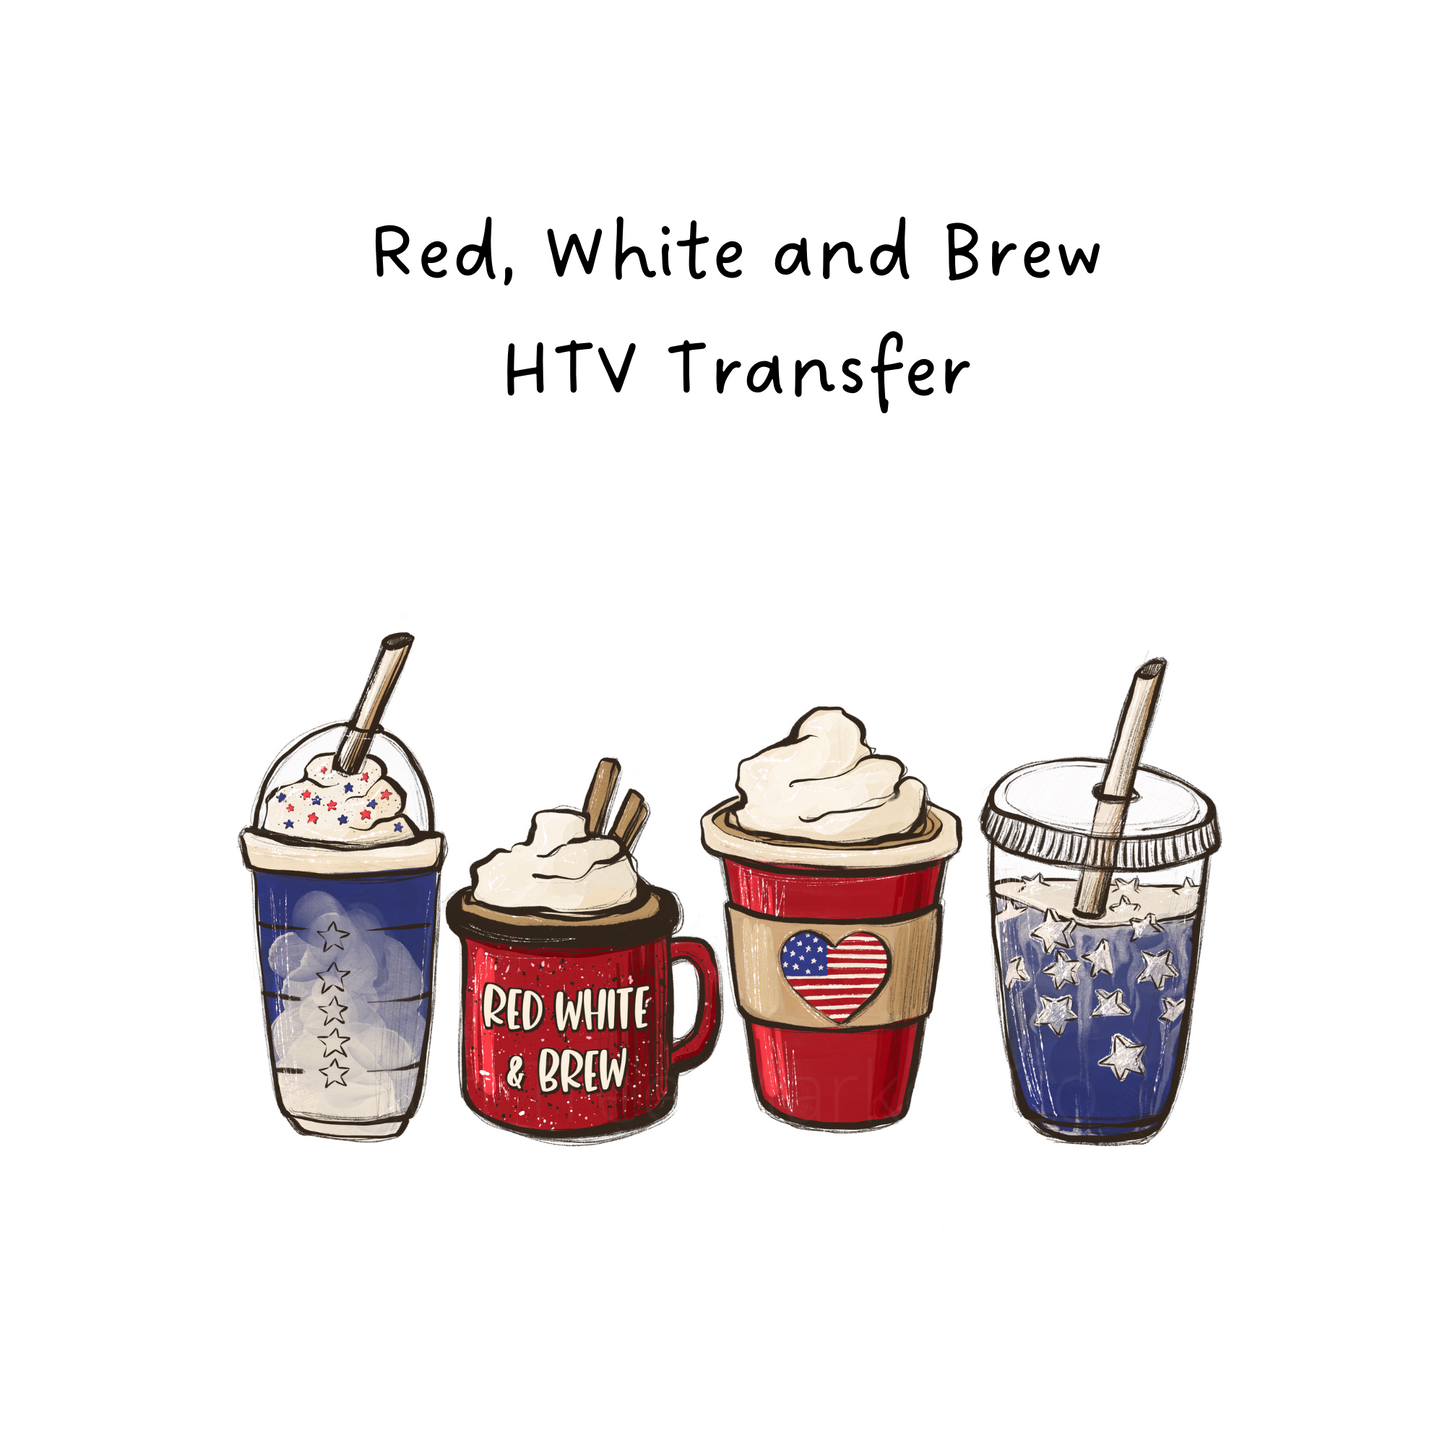 Red White and Brew HTV Transfer